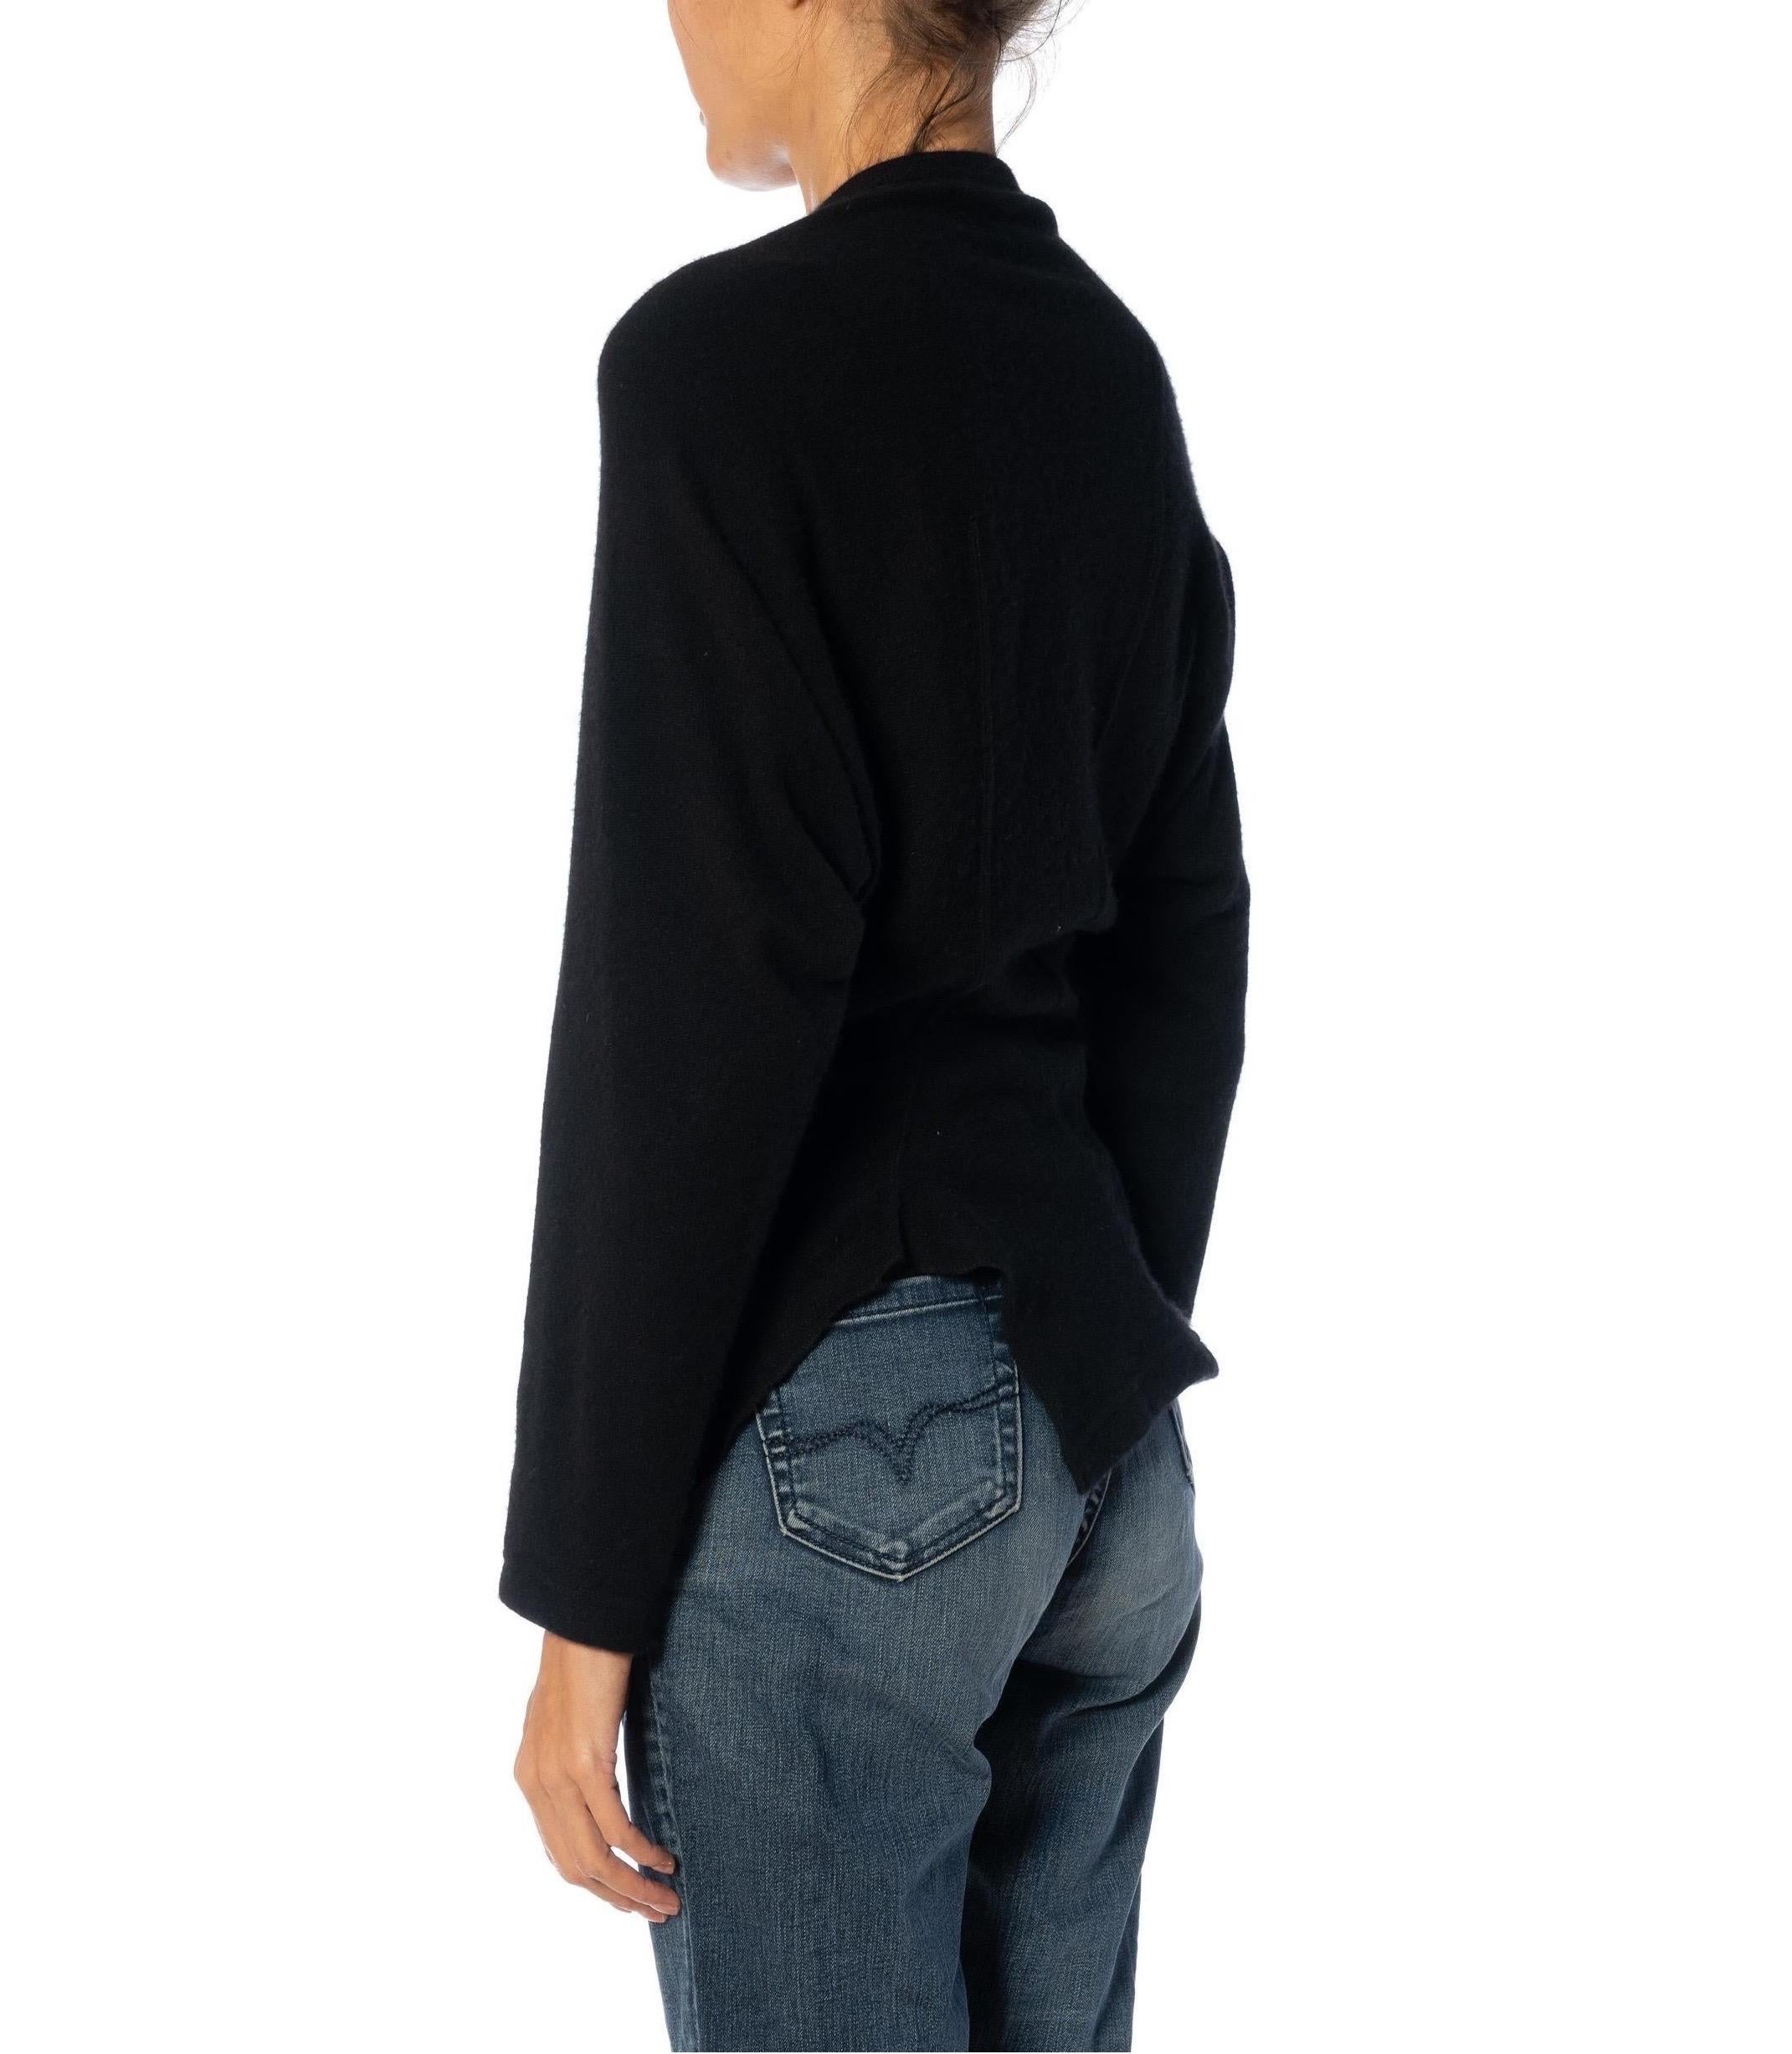 2000S COMME DES GARCONS Black Cashmere Asymmetrically Seamed Sweater 2004 For Sale 2